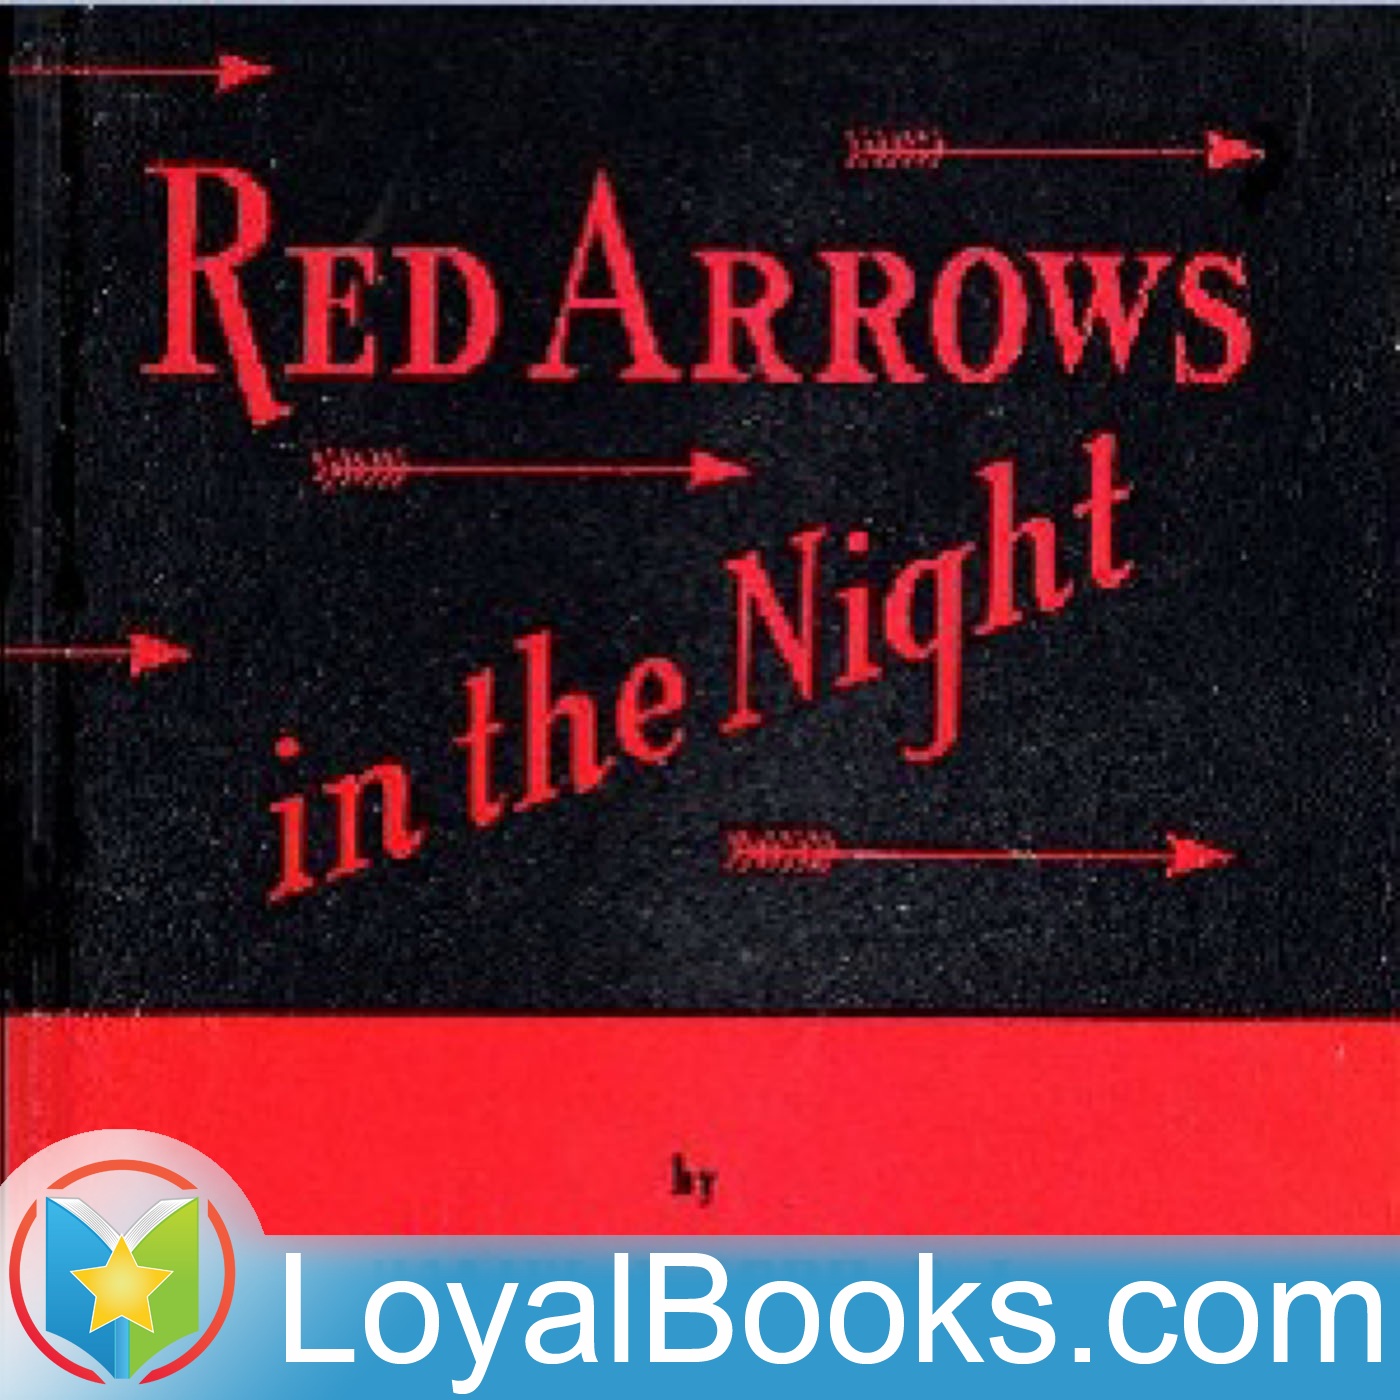 Red Arrows in the Night by Daniel A. Lord